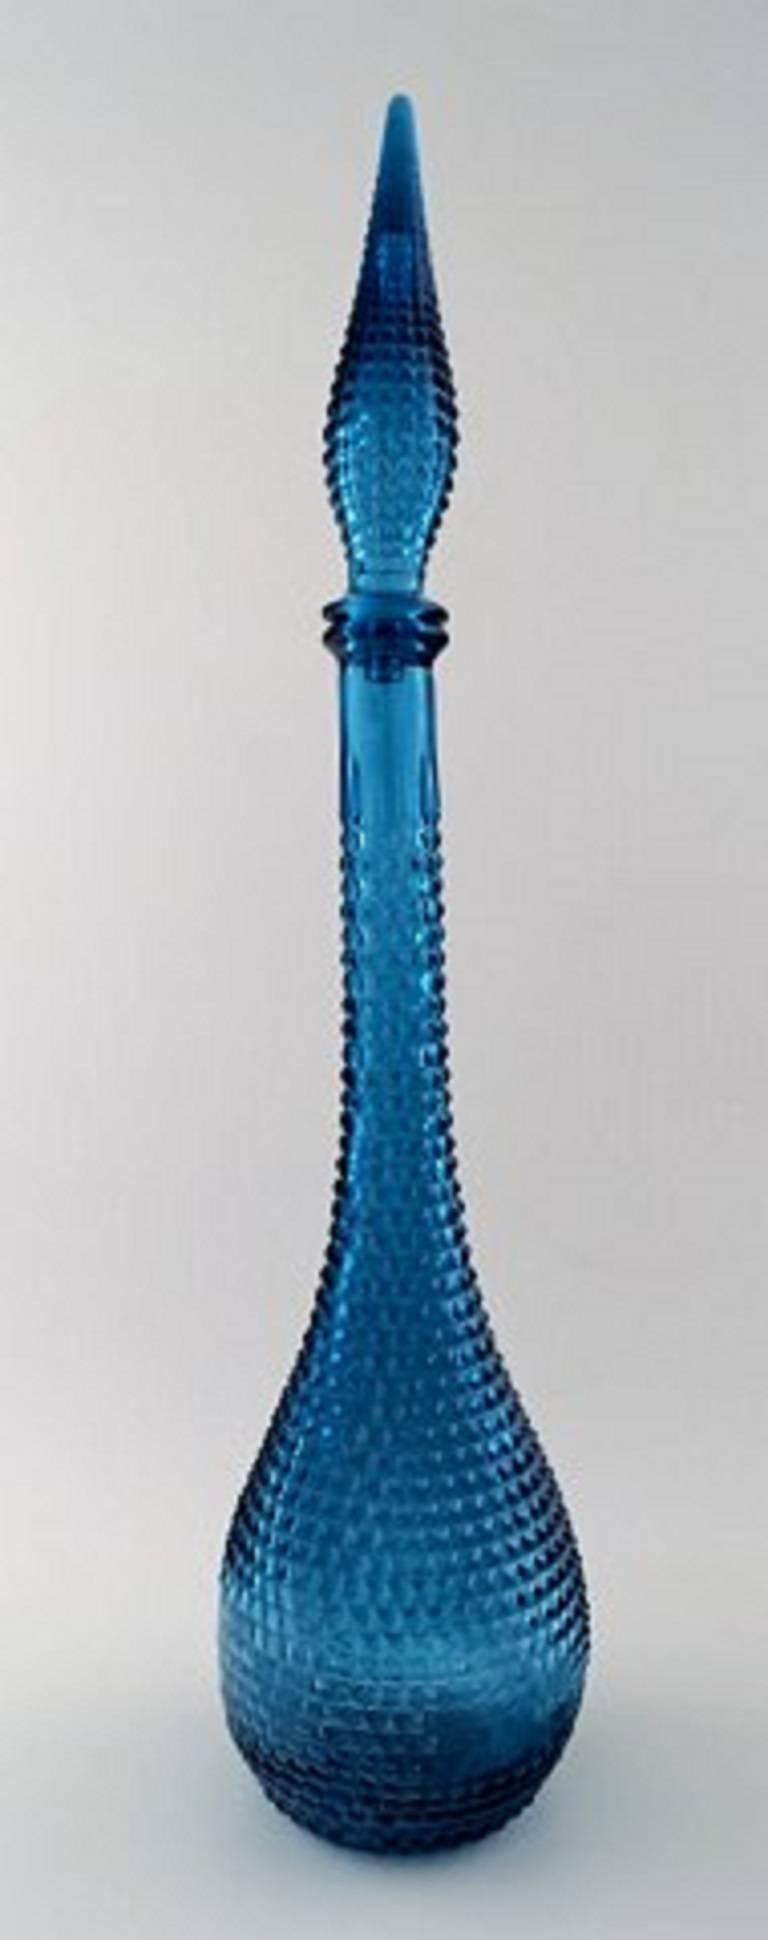 A pair of very tall turquoise decanters. Venini style, 1960s-1970s.

Measures: 56 cm x 13 cm.

In perfect condition.

Stamped. Made in Italy.